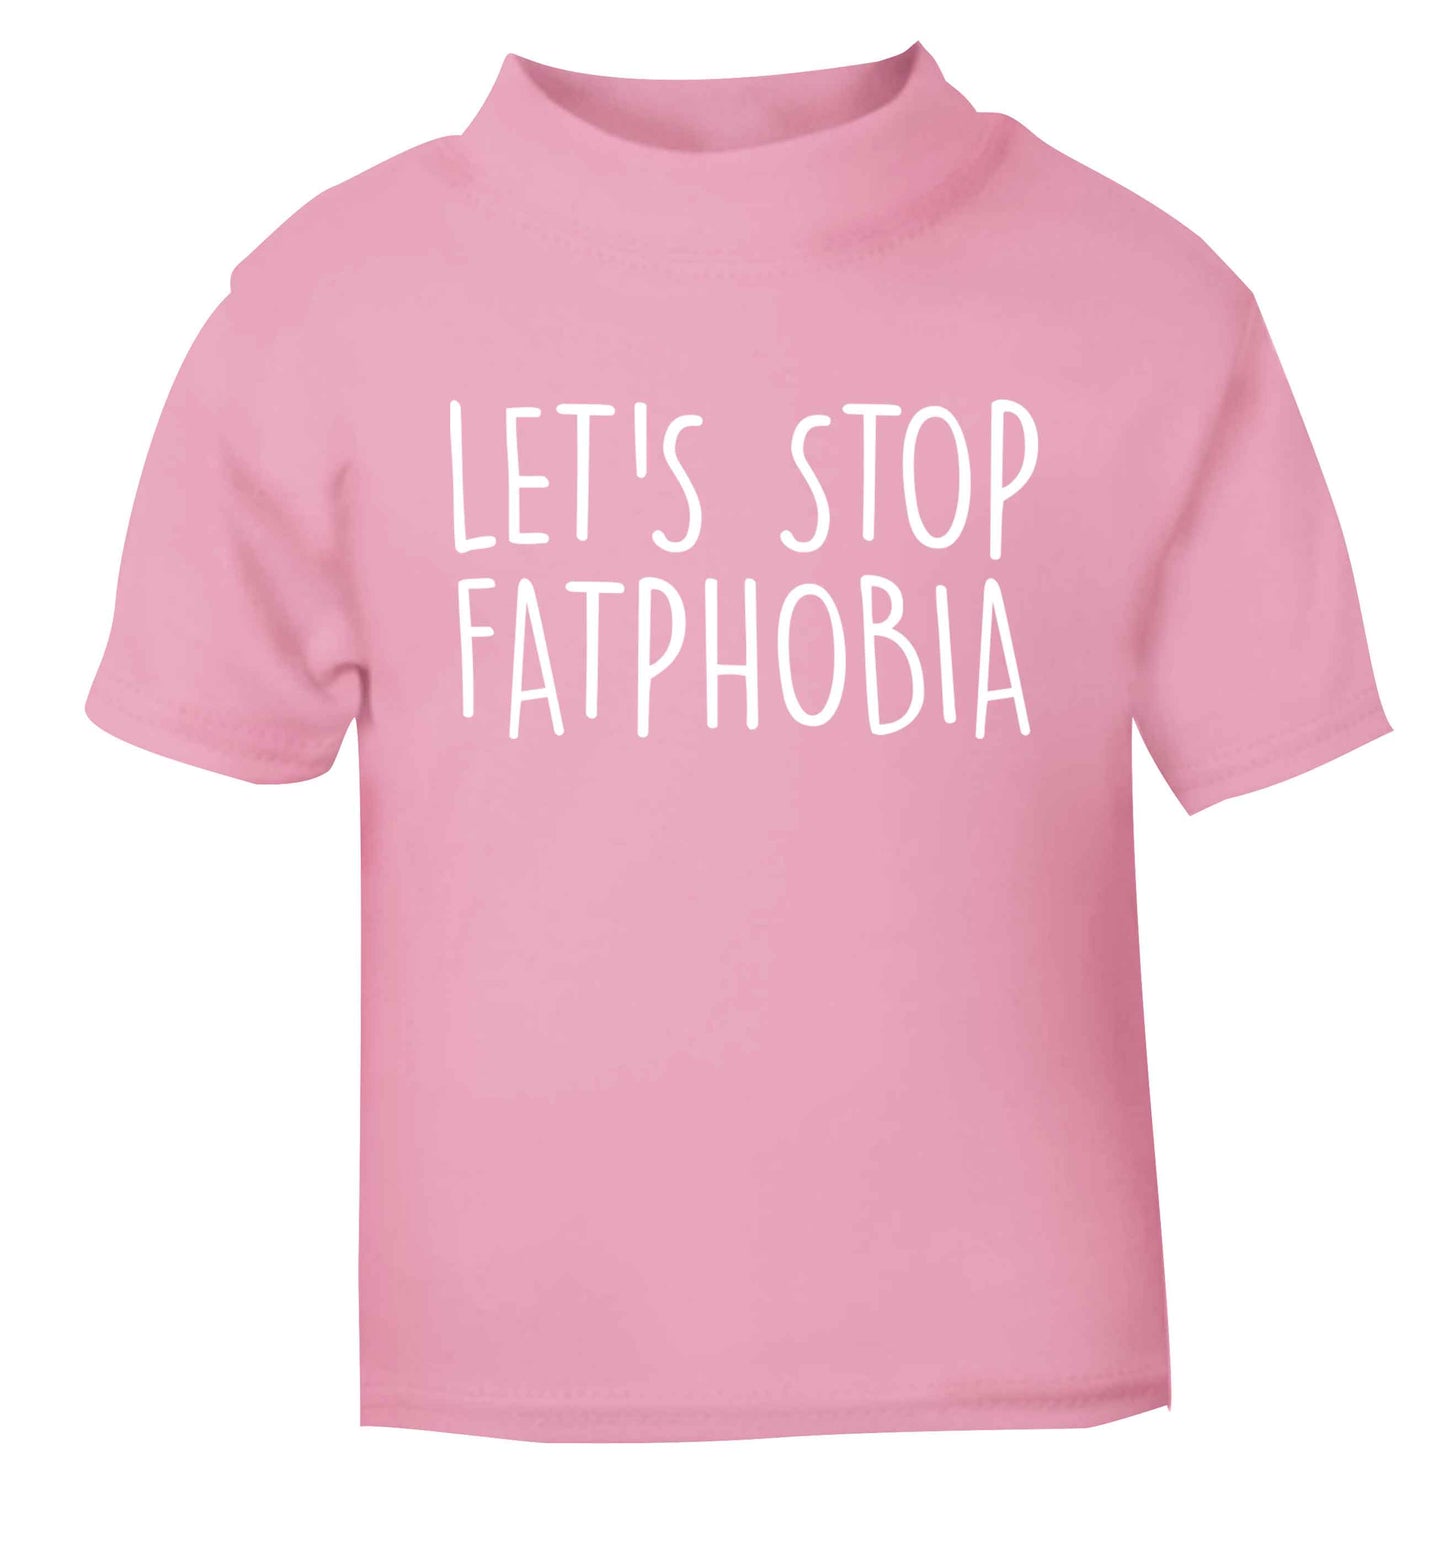 Let's stop fatphobia light pink baby toddler Tshirt 2 Years